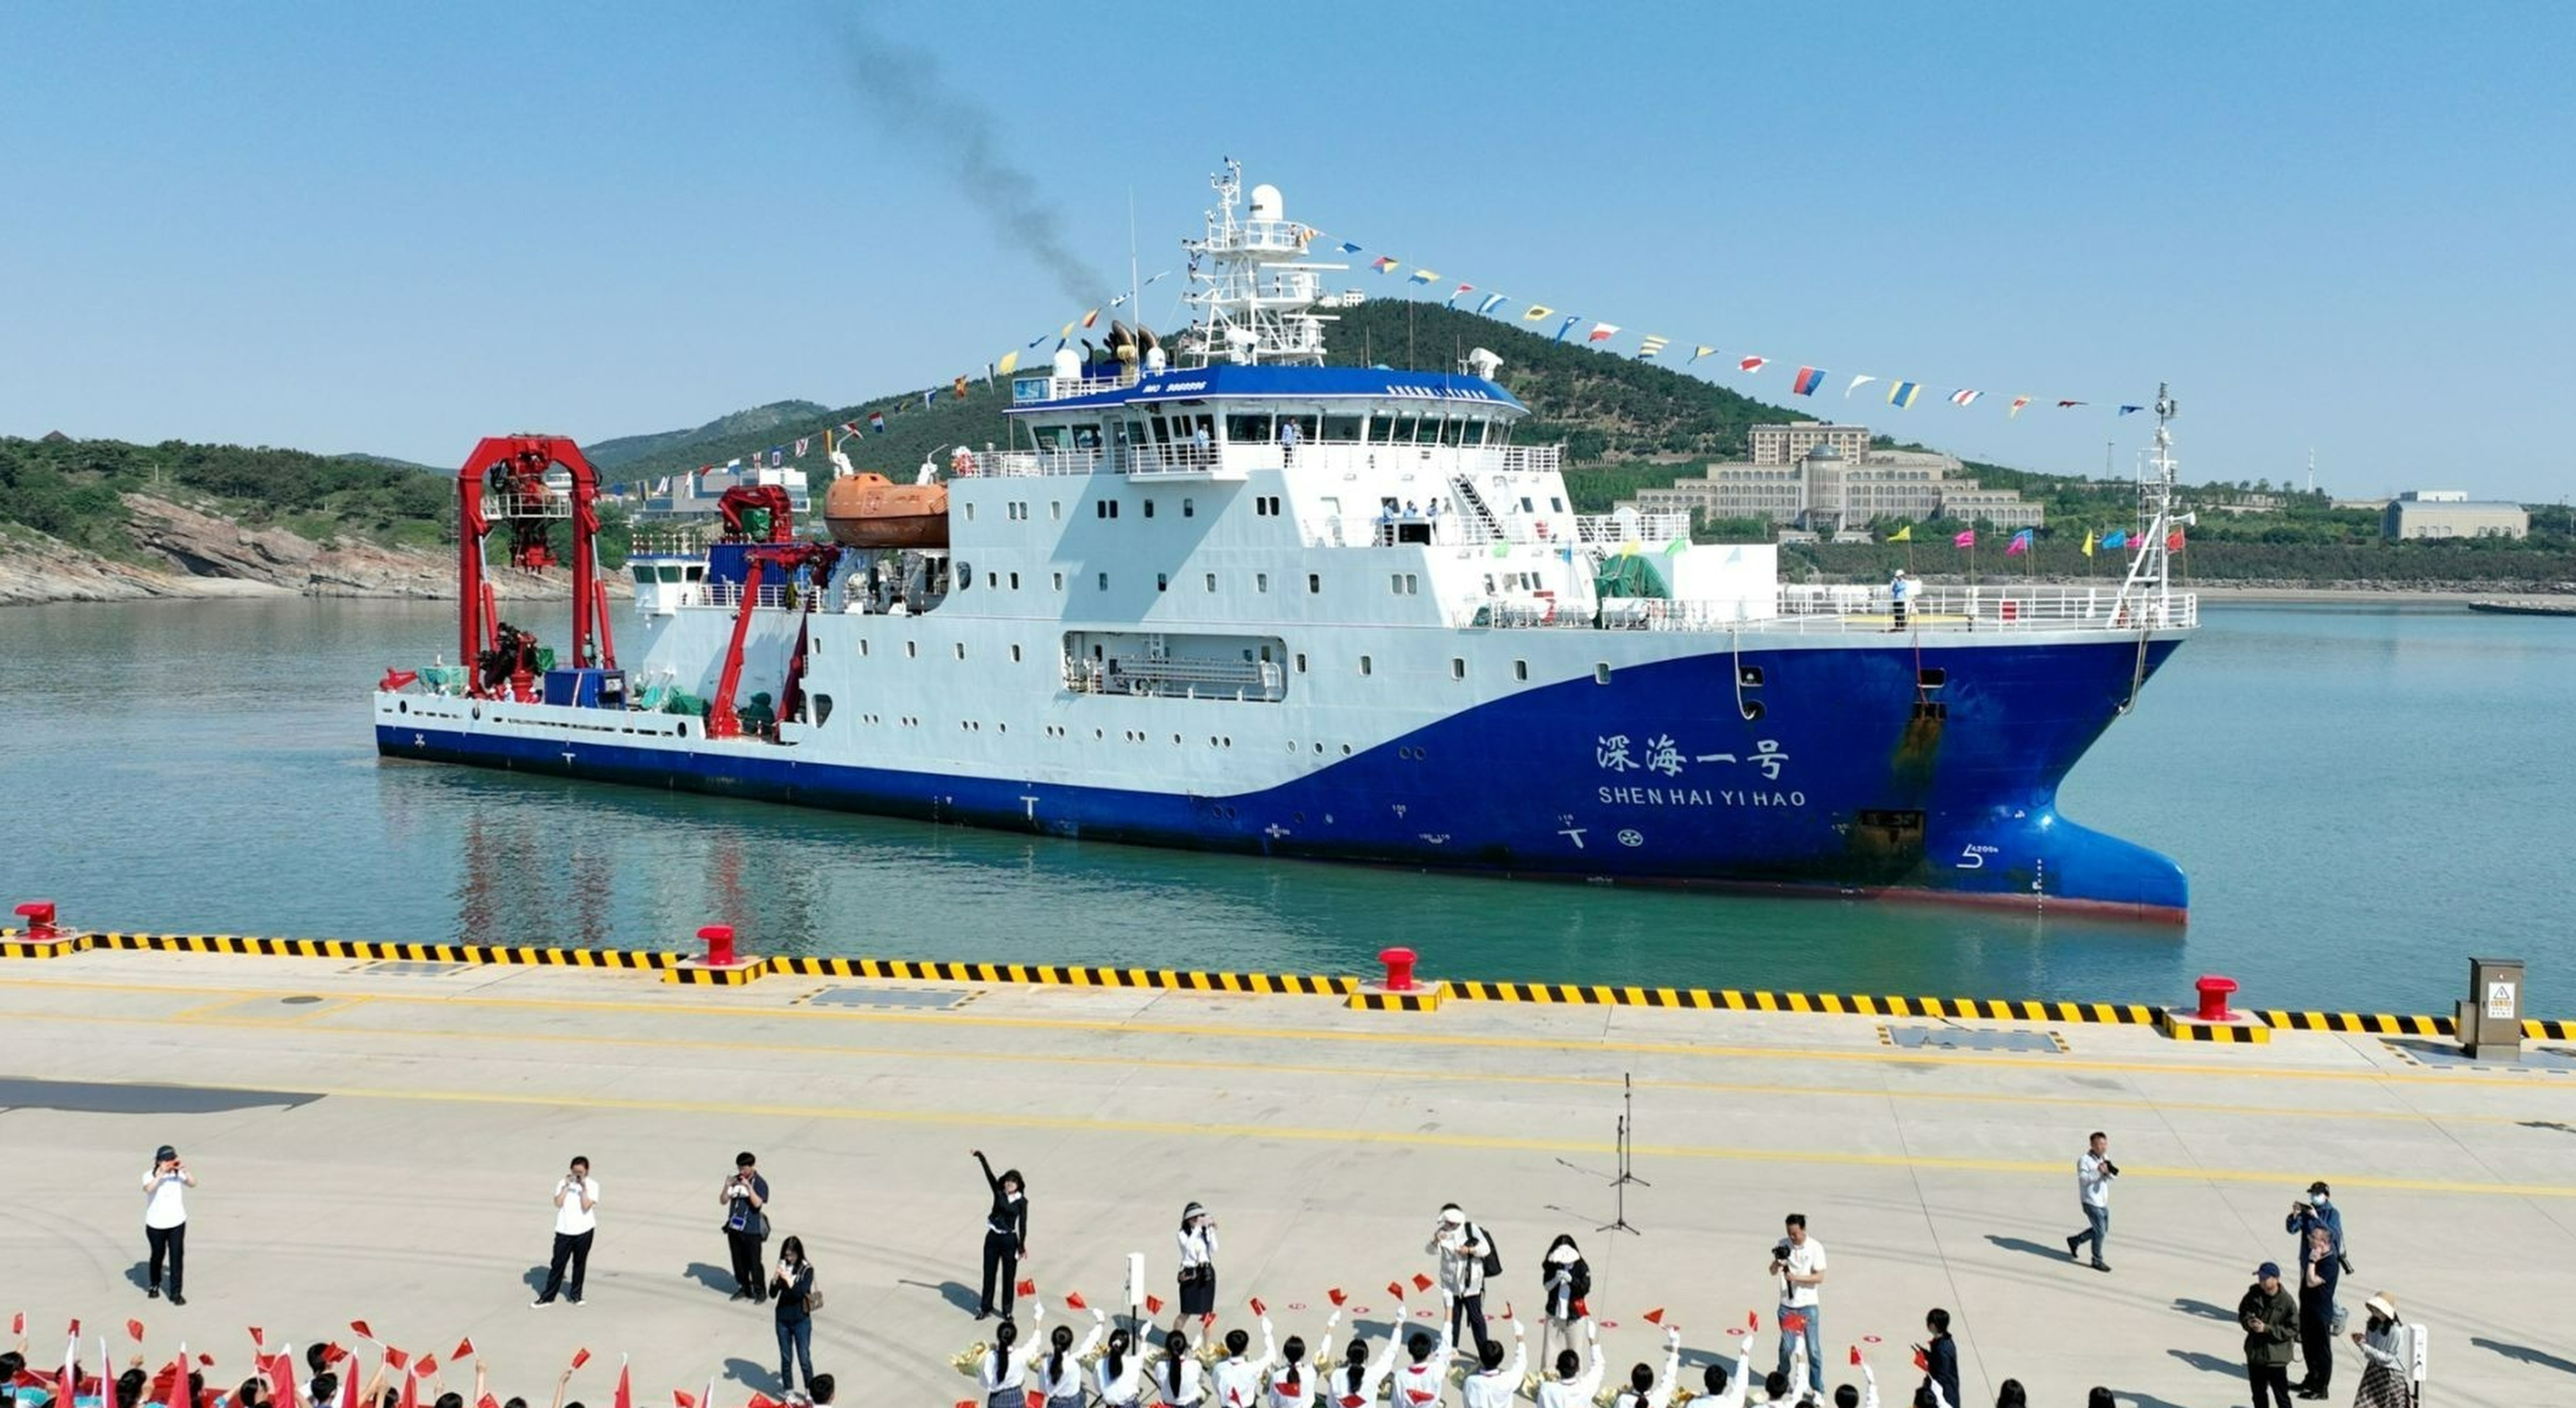 China has completed its first manned deep-sea scientific expedition to the Atlantic Ocean. Photo: Handout / SCMP